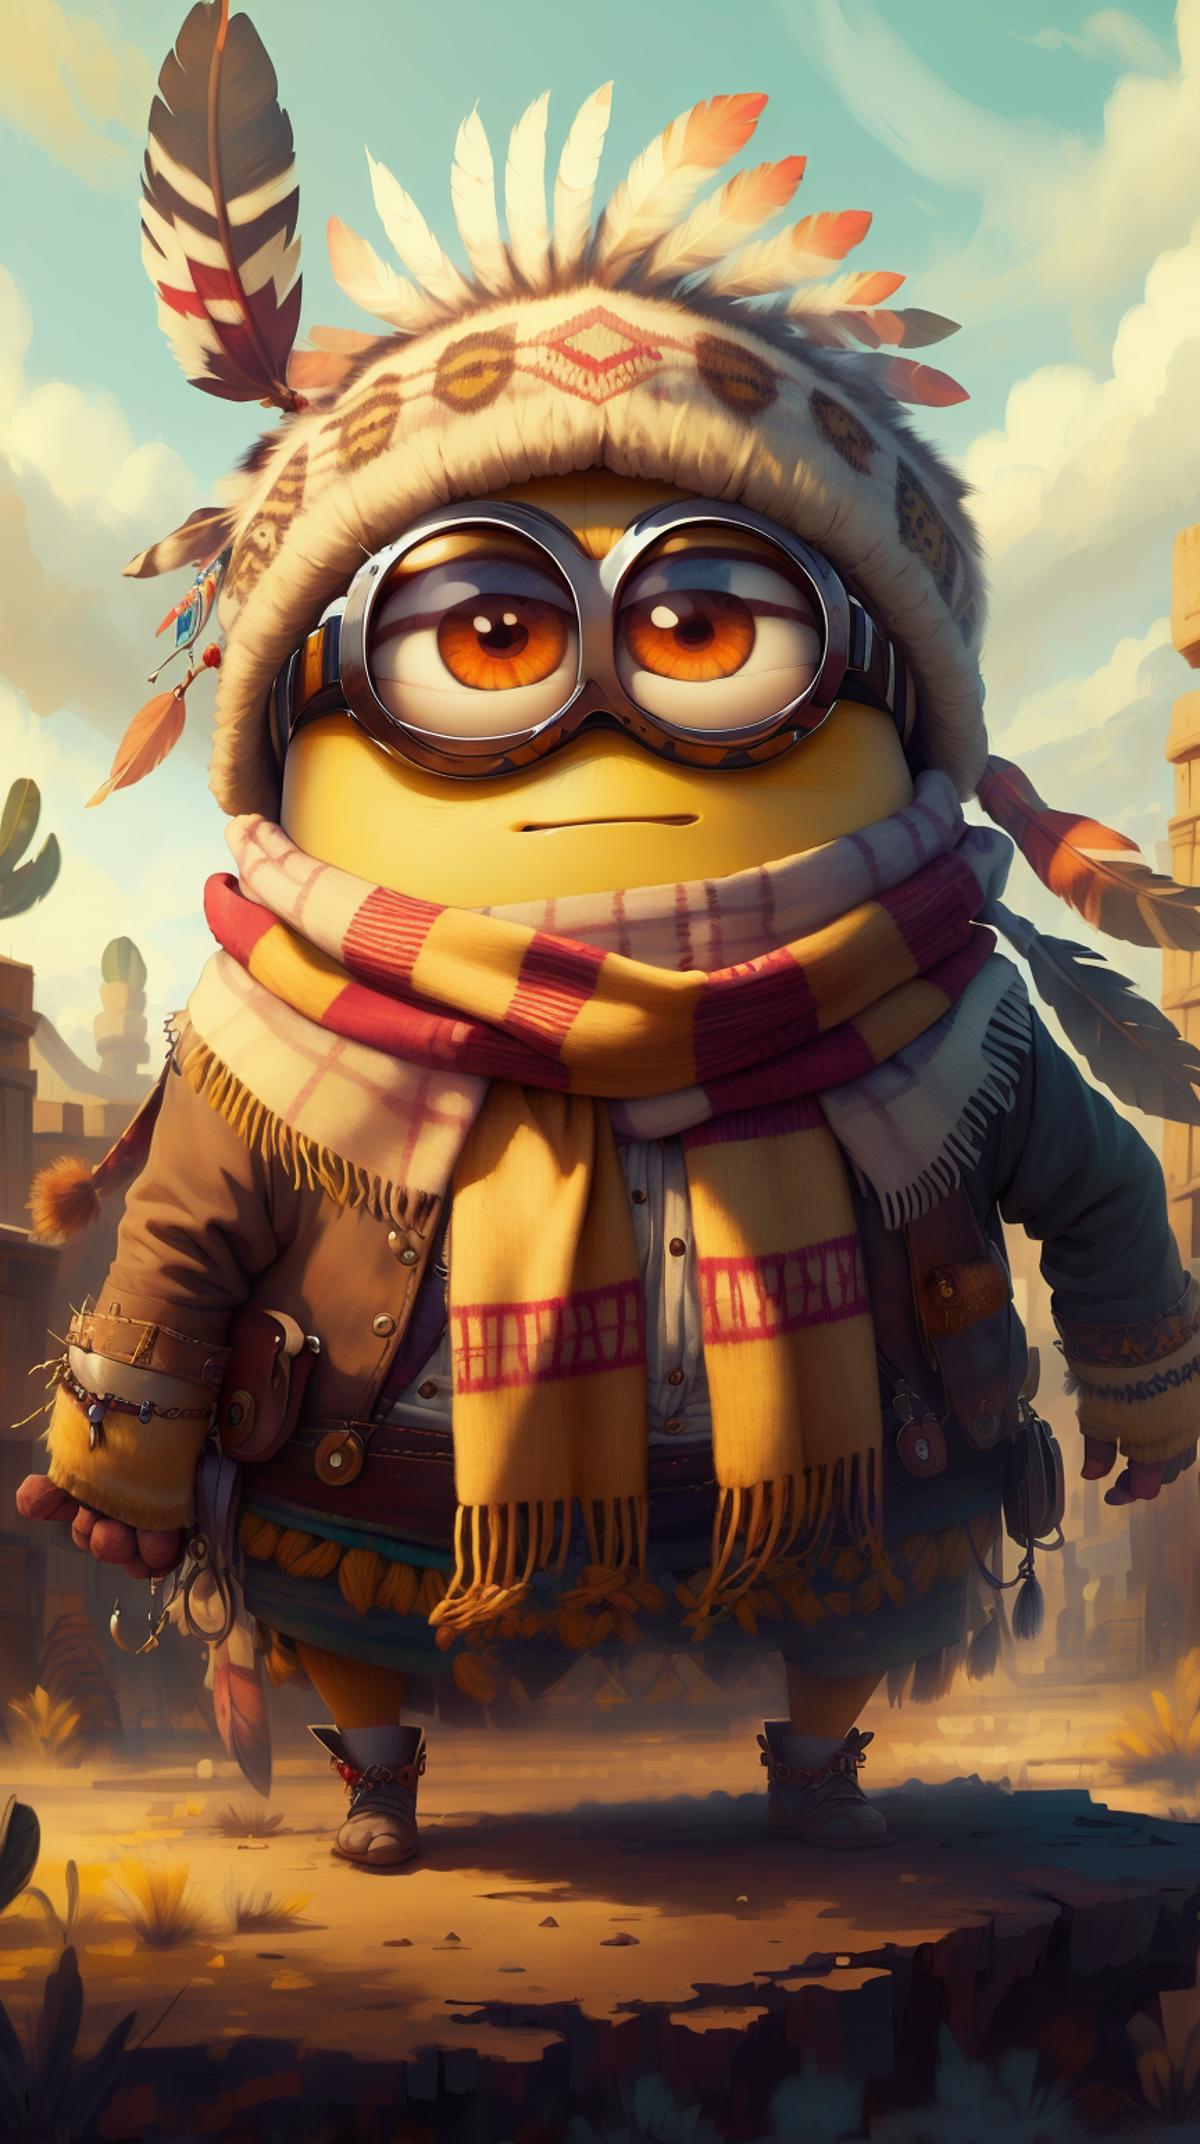 Minion Style - Make your own Minions! image by mnemic